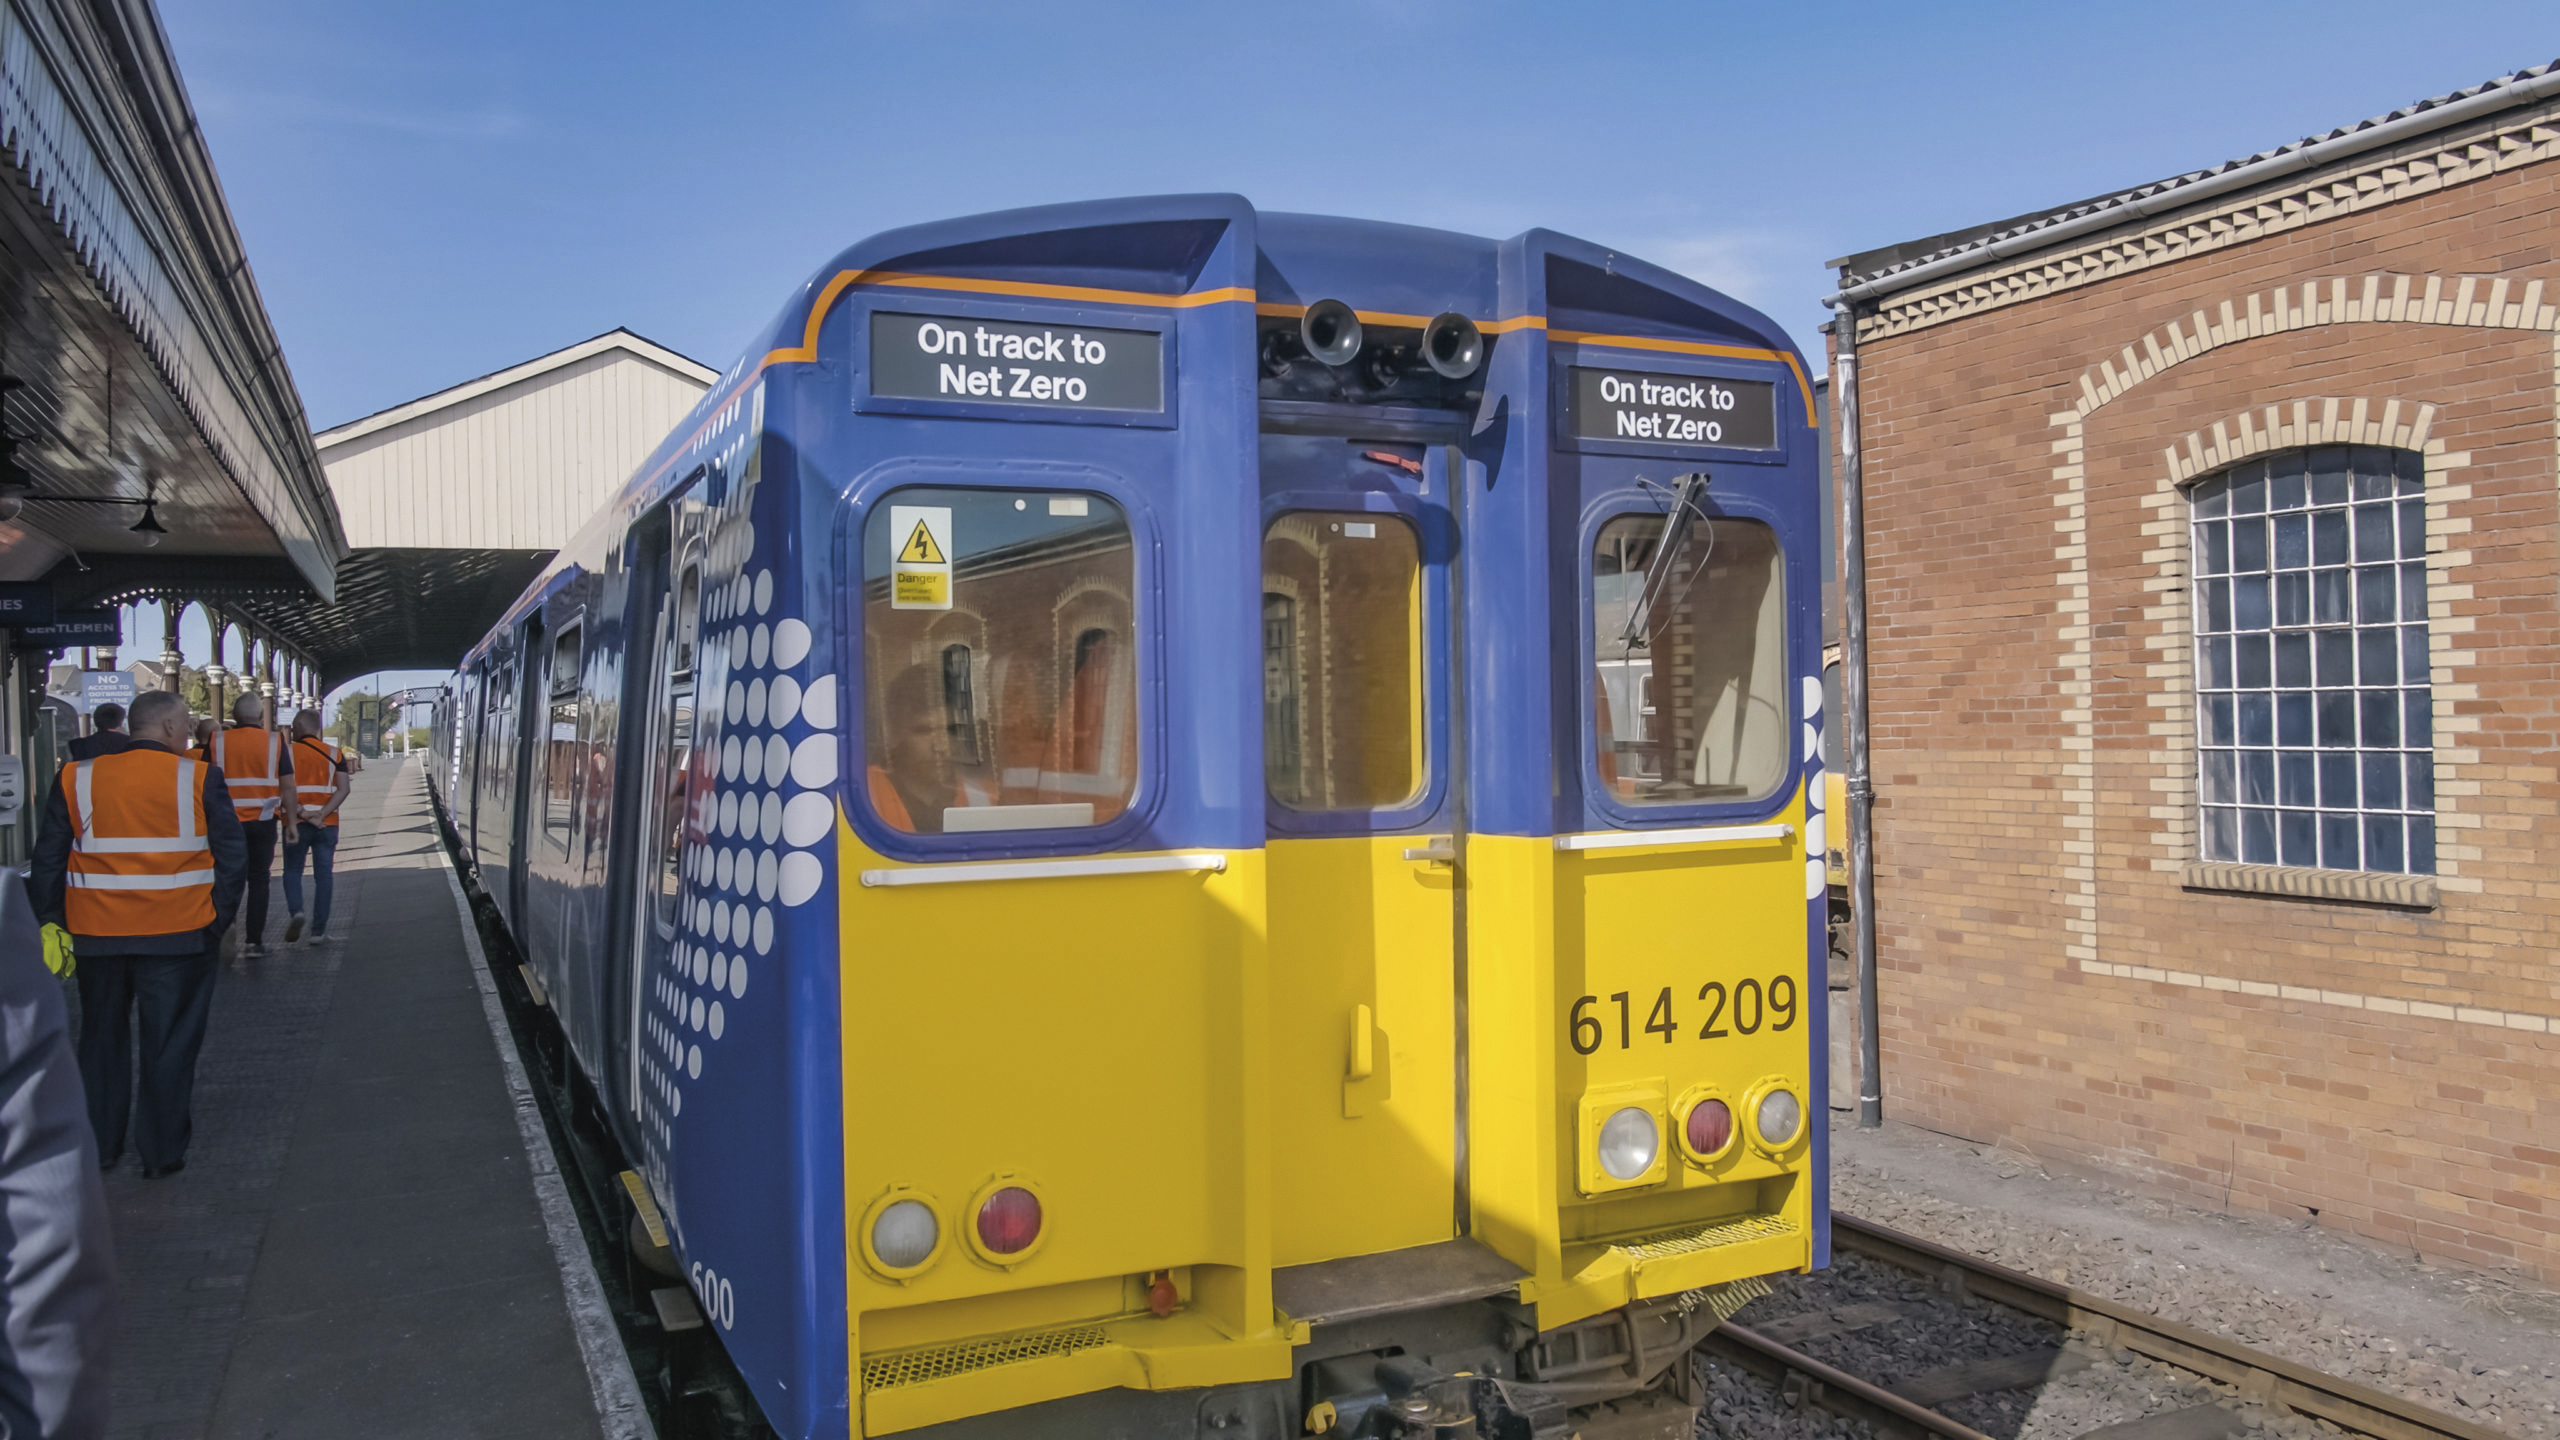 Train carriage in blue and yellow